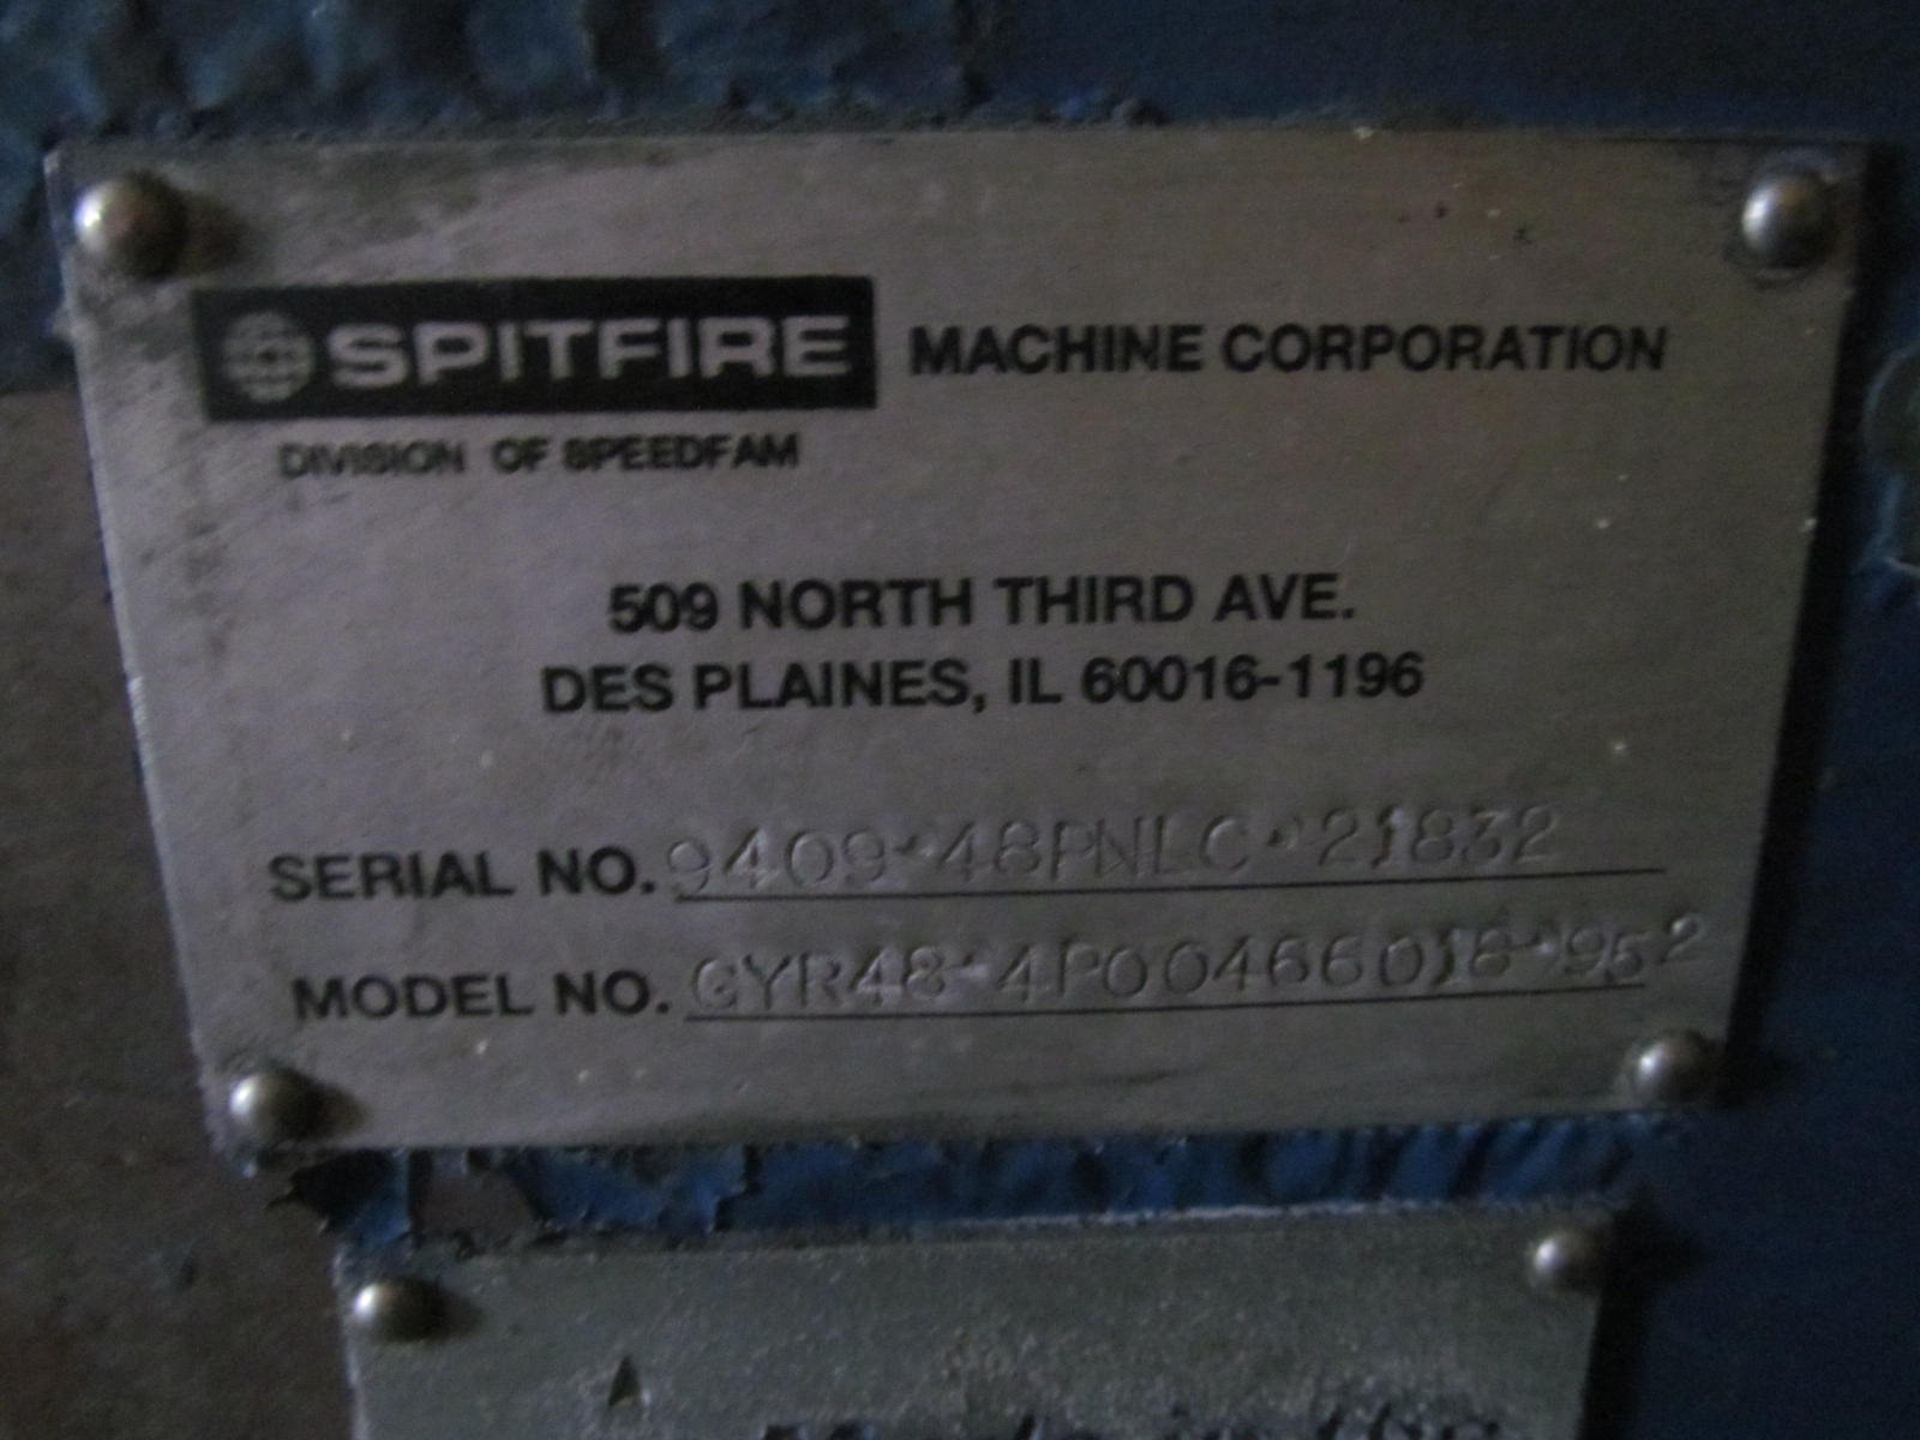 SPEEDFAM Spitfire GYR48-4P00466018-952 Lapping Machine, s/n 9409-48PNLC-21832 - Image 4 of 4